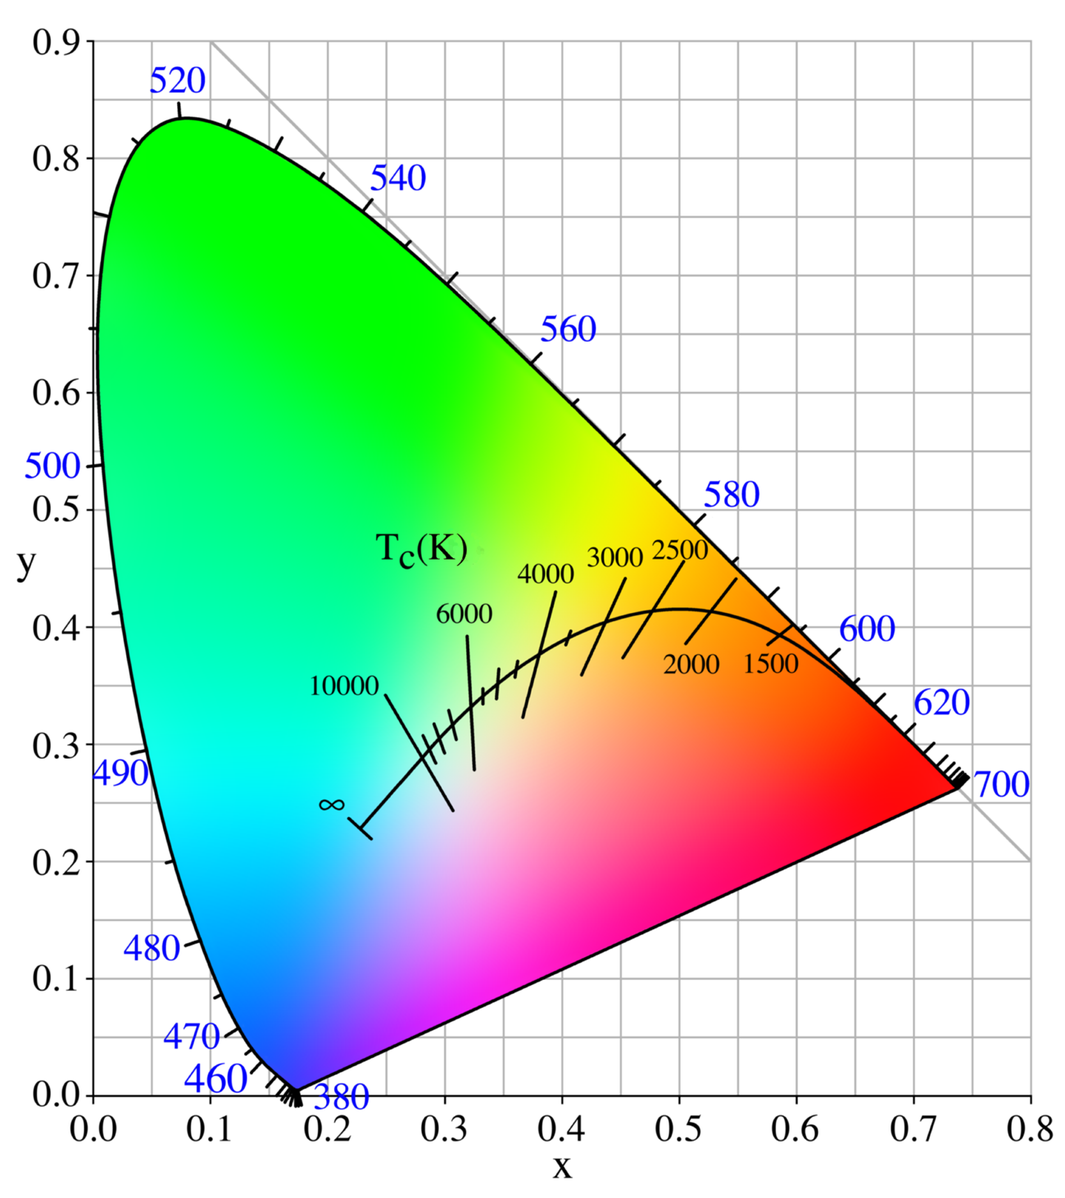 CIE color space with curved line marking black body radiation beginning from red corner and curving to blue at temperatures above ten thousand Kelvin.